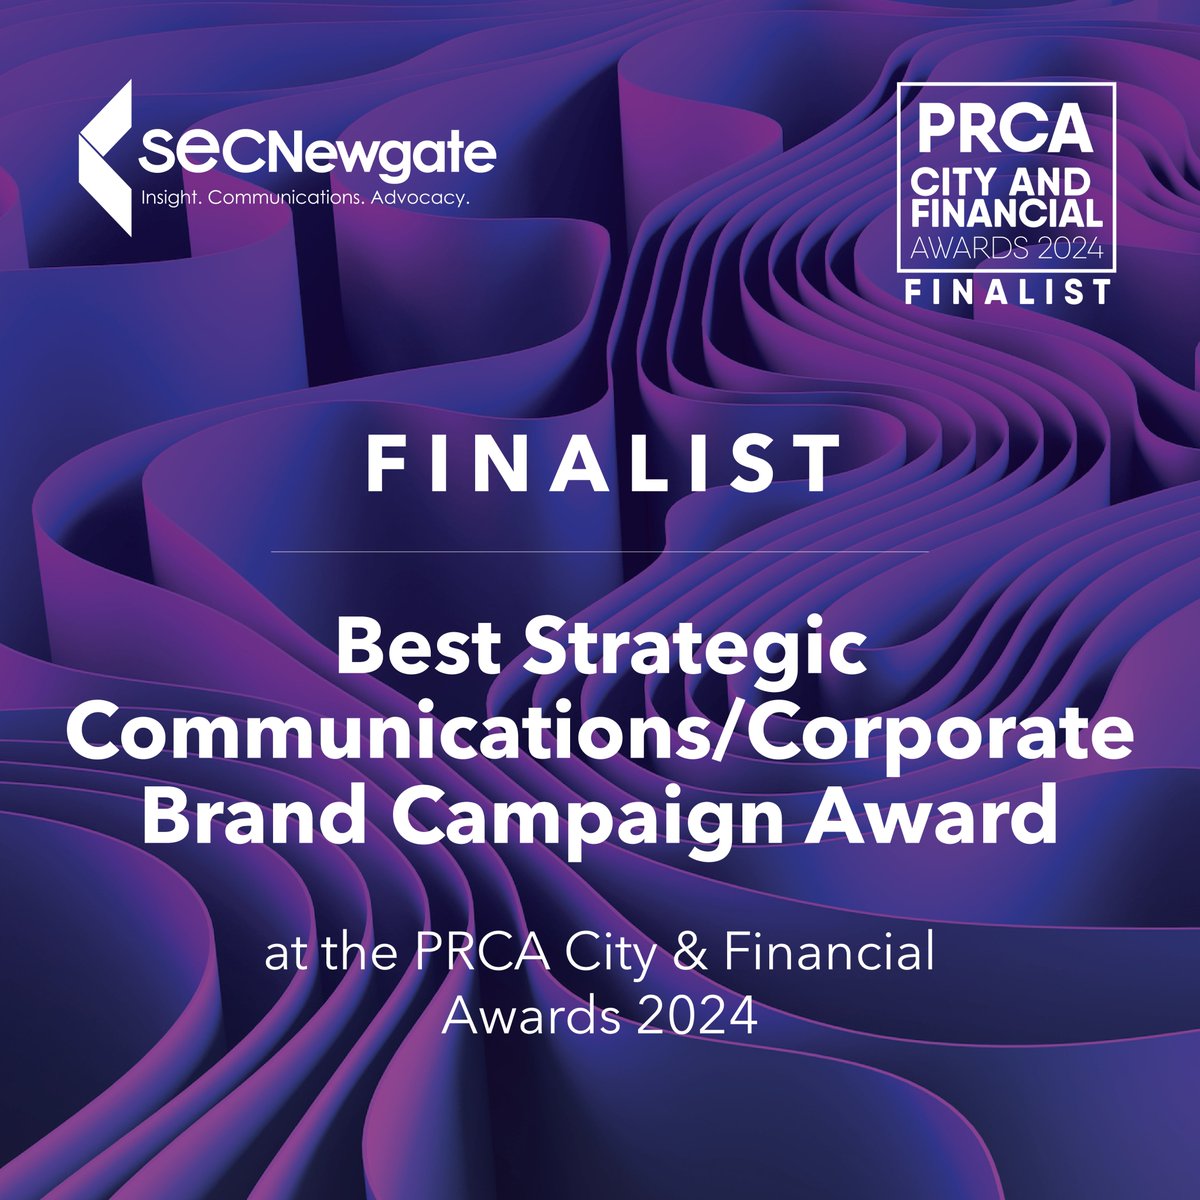 We're delighted to have been selected as a finalist at the PRCA City & Financial Awards 2024 for the Best Strategic Communications/Corporate Brand Campaign Award for our work with JM Finn. Congratulations to all other finalists. #awards #finalists #corporatecomms